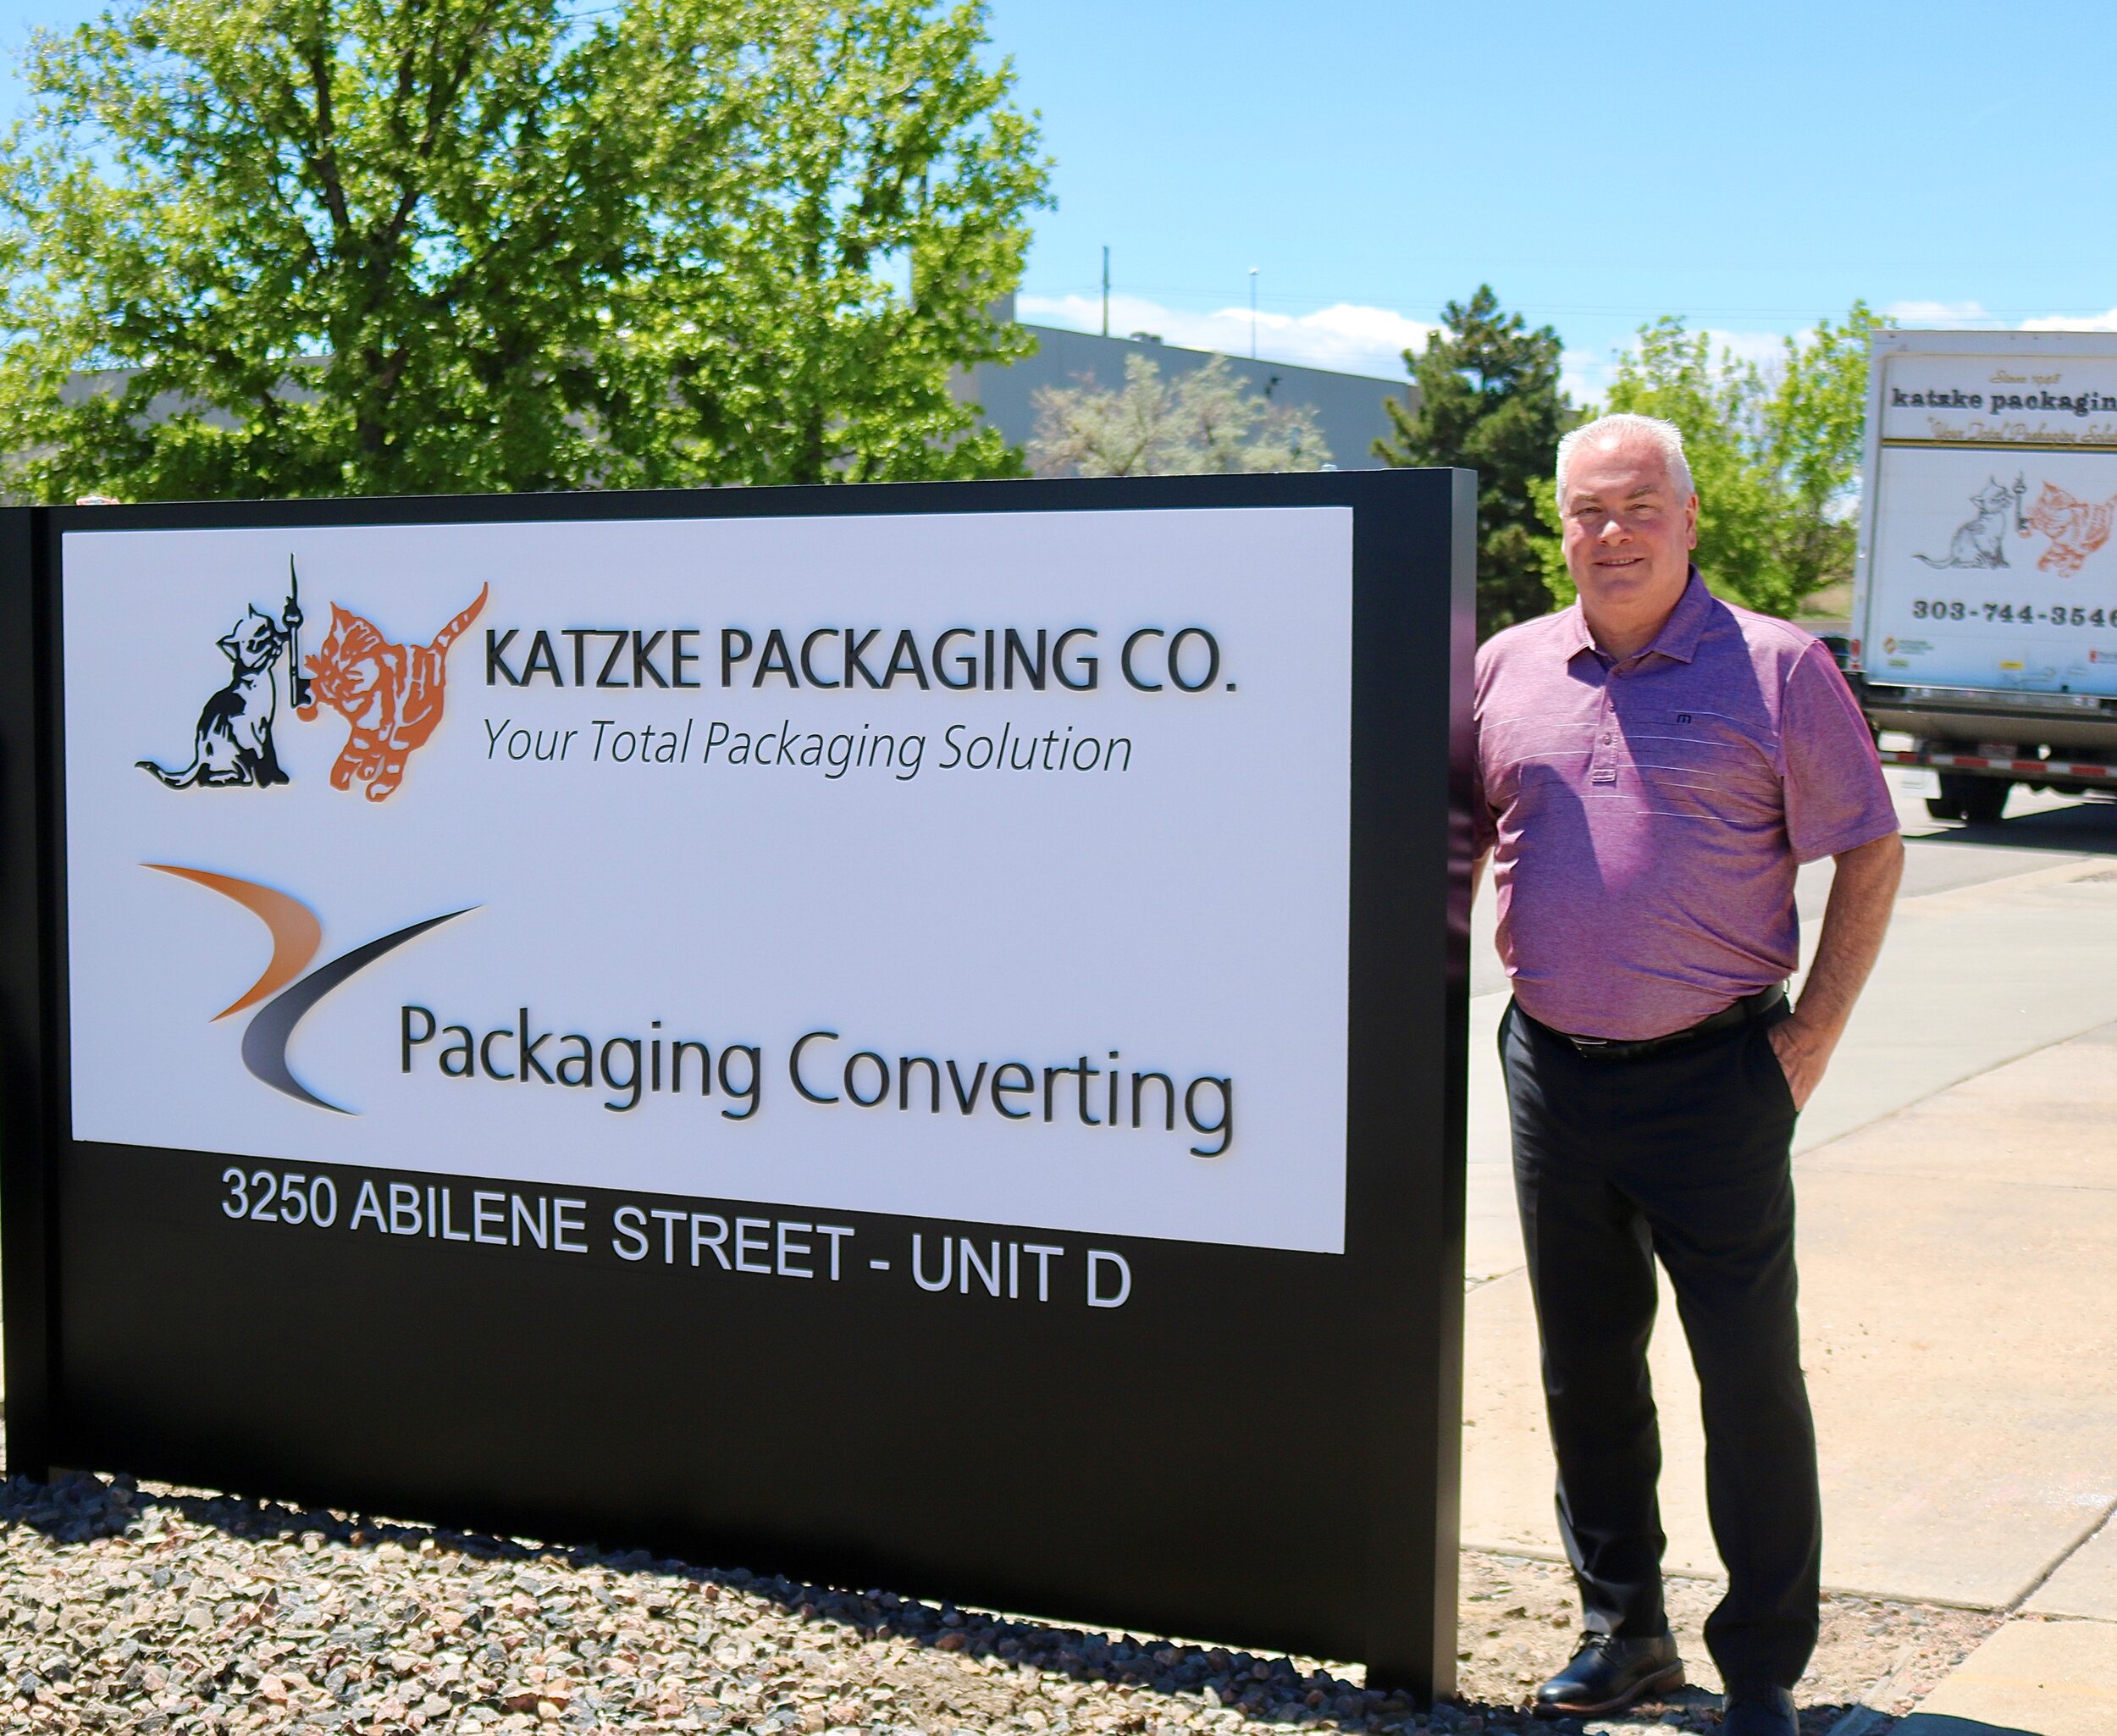 November 2018 - In November of 2018, Glenn became the full owner of Katzke Packaging Co. after being the monetary owner since 2012. Glenn worked hard to innovate and grow the business to where it is today. 